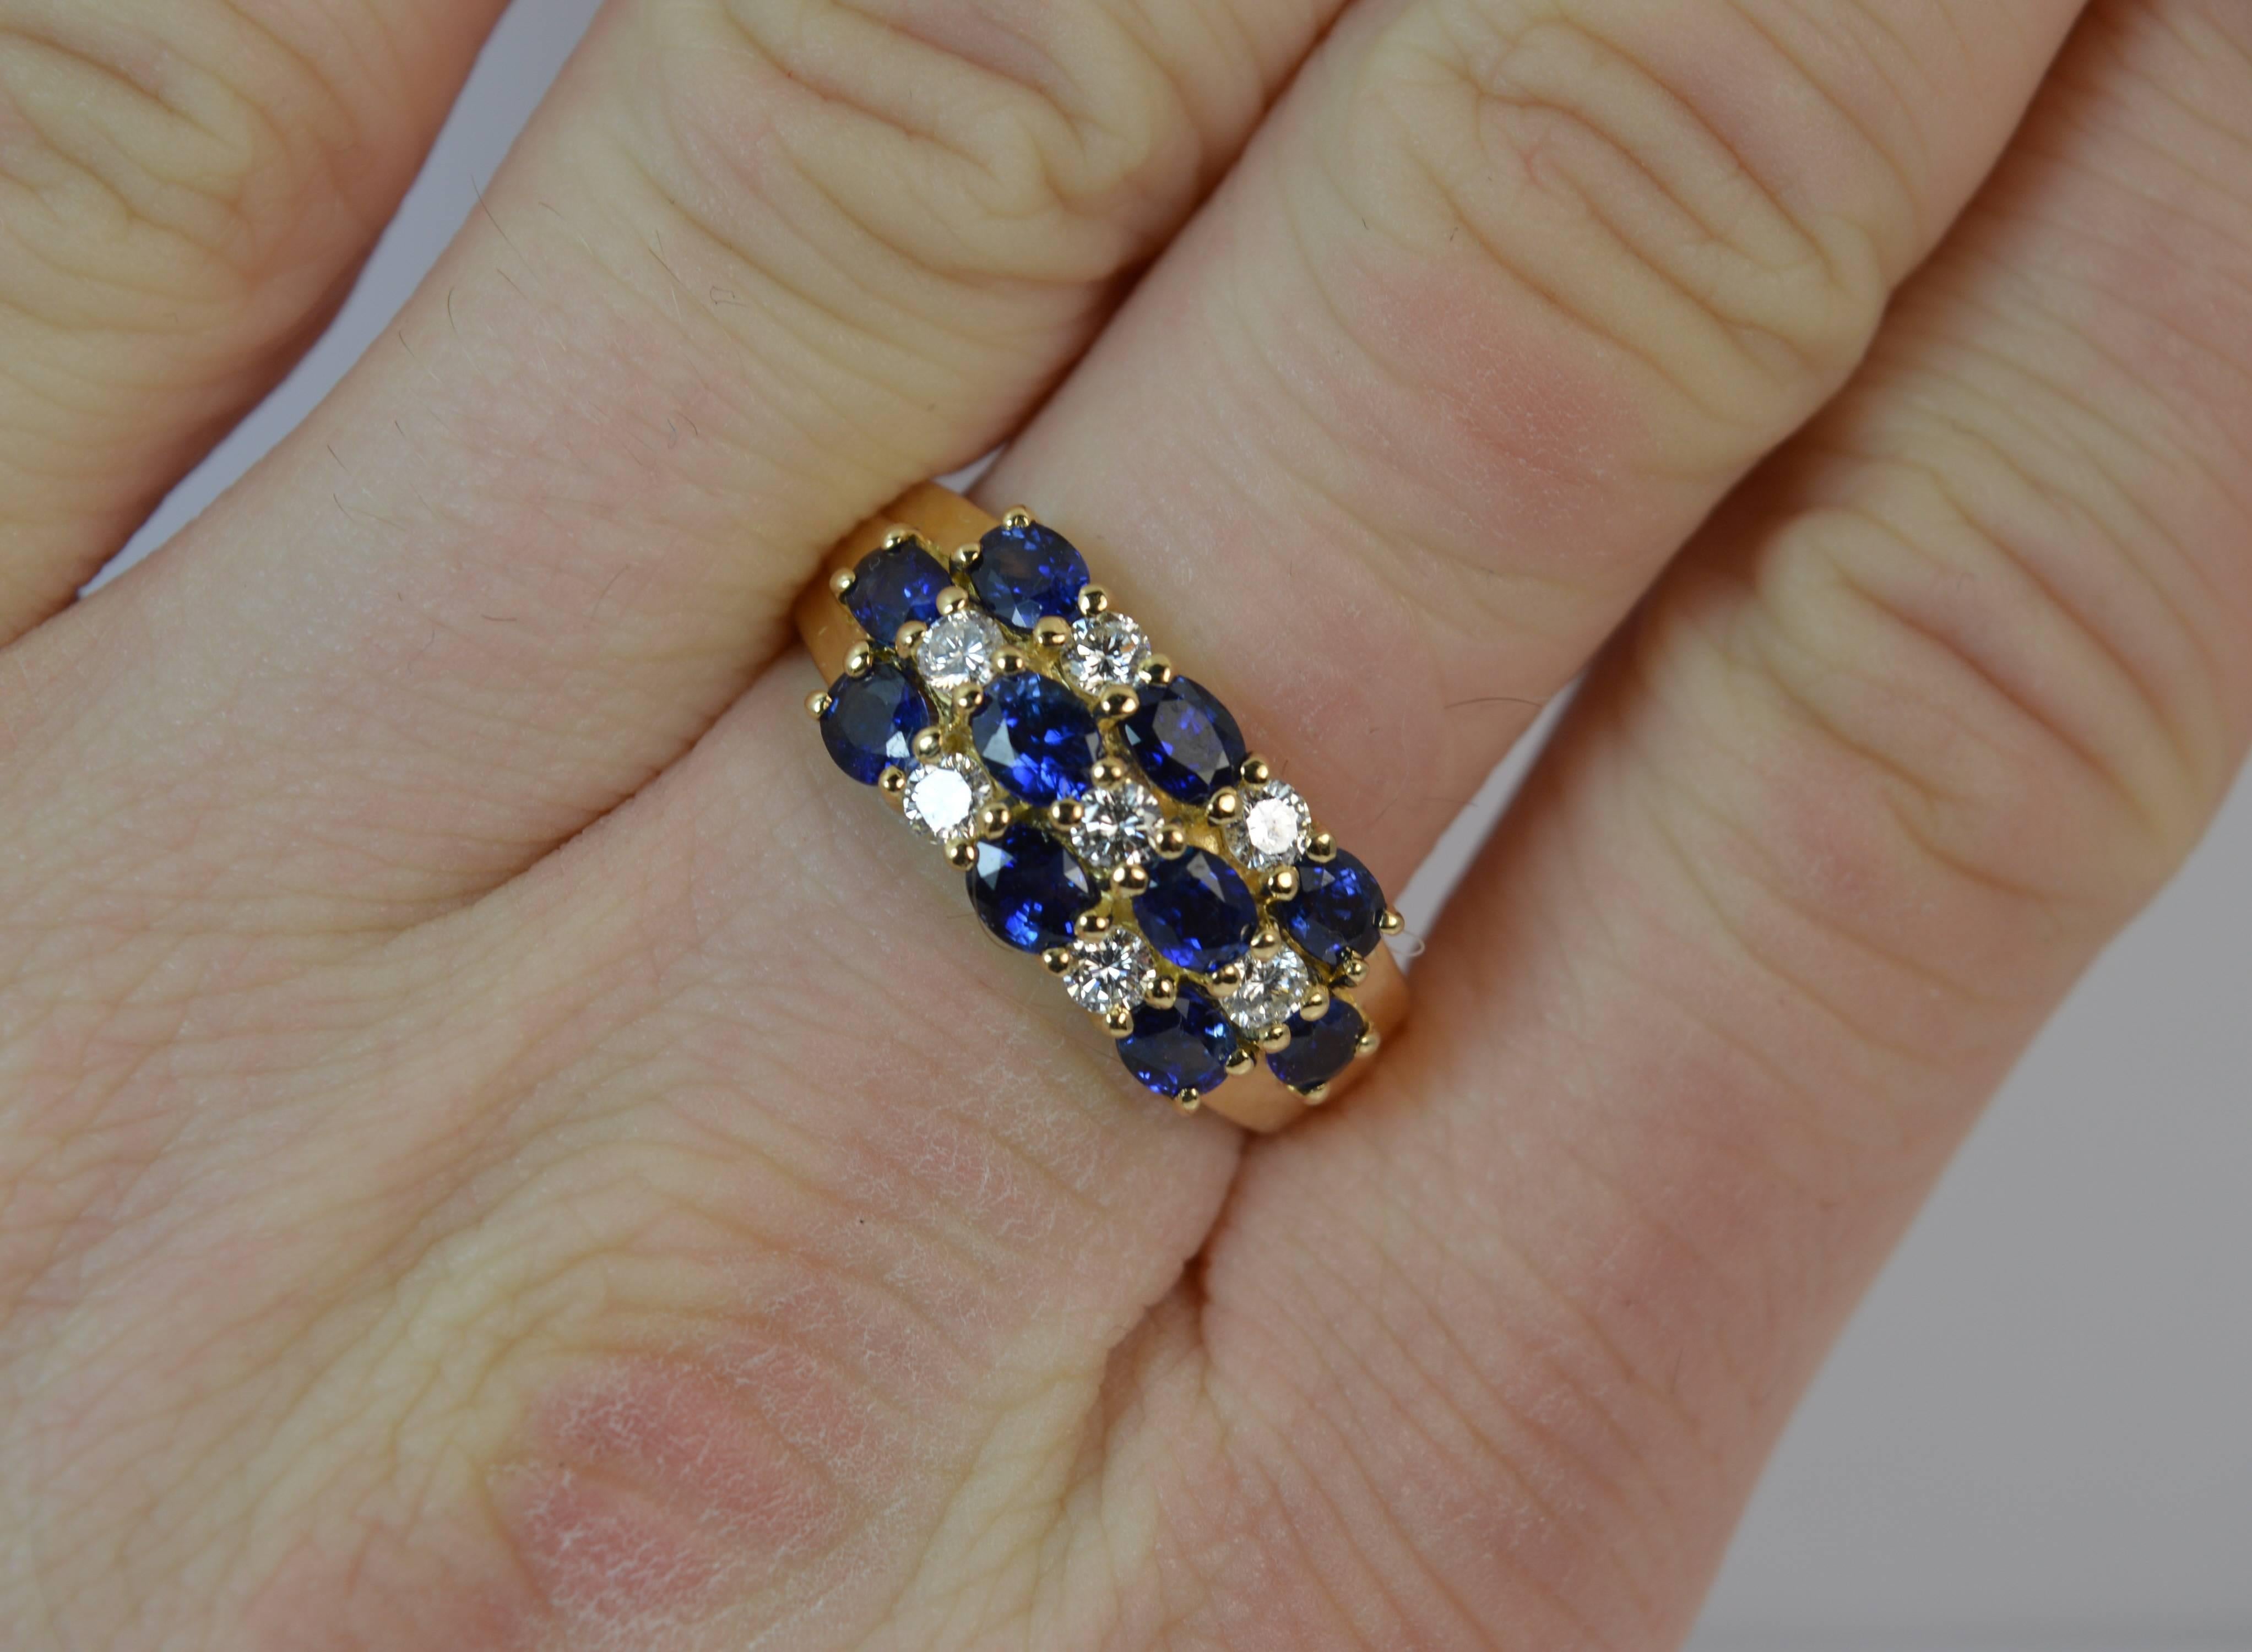 
A stunning ladies Sapphire and Diamond cluster ring.

Designed with three rows of alternating natural sapphires and diamonds.

​VS1 bright, white and sparkly round brilliant cut diamonds and oval cut vibrant vivid blue sapphires creating a 20mm x